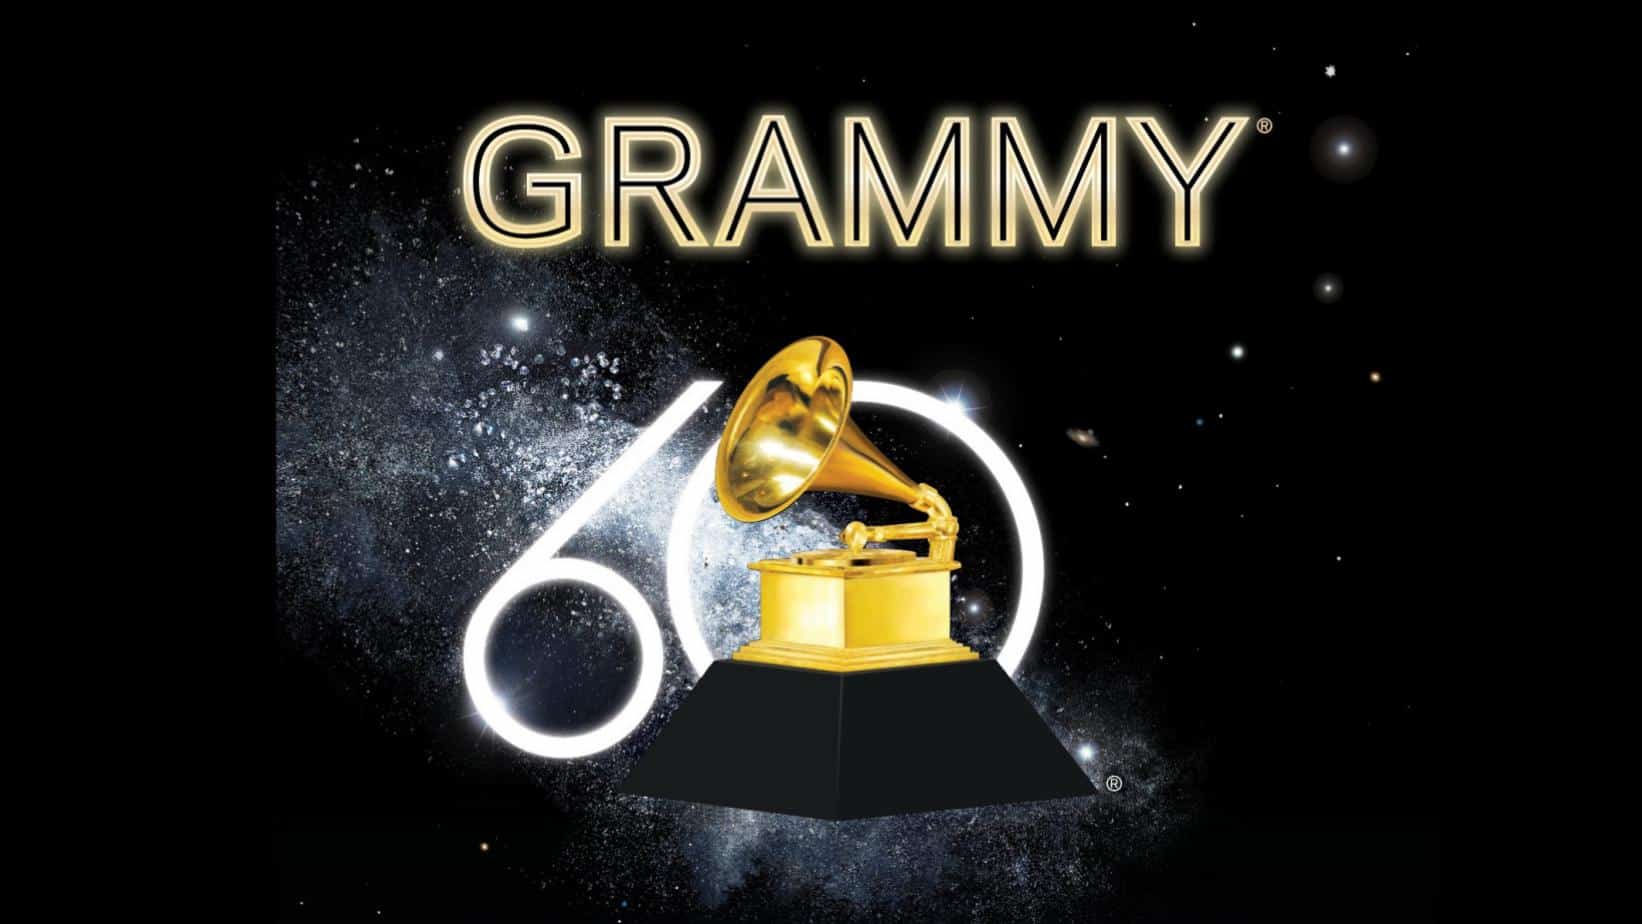 Grammys 2018: Full list of nominees and winners